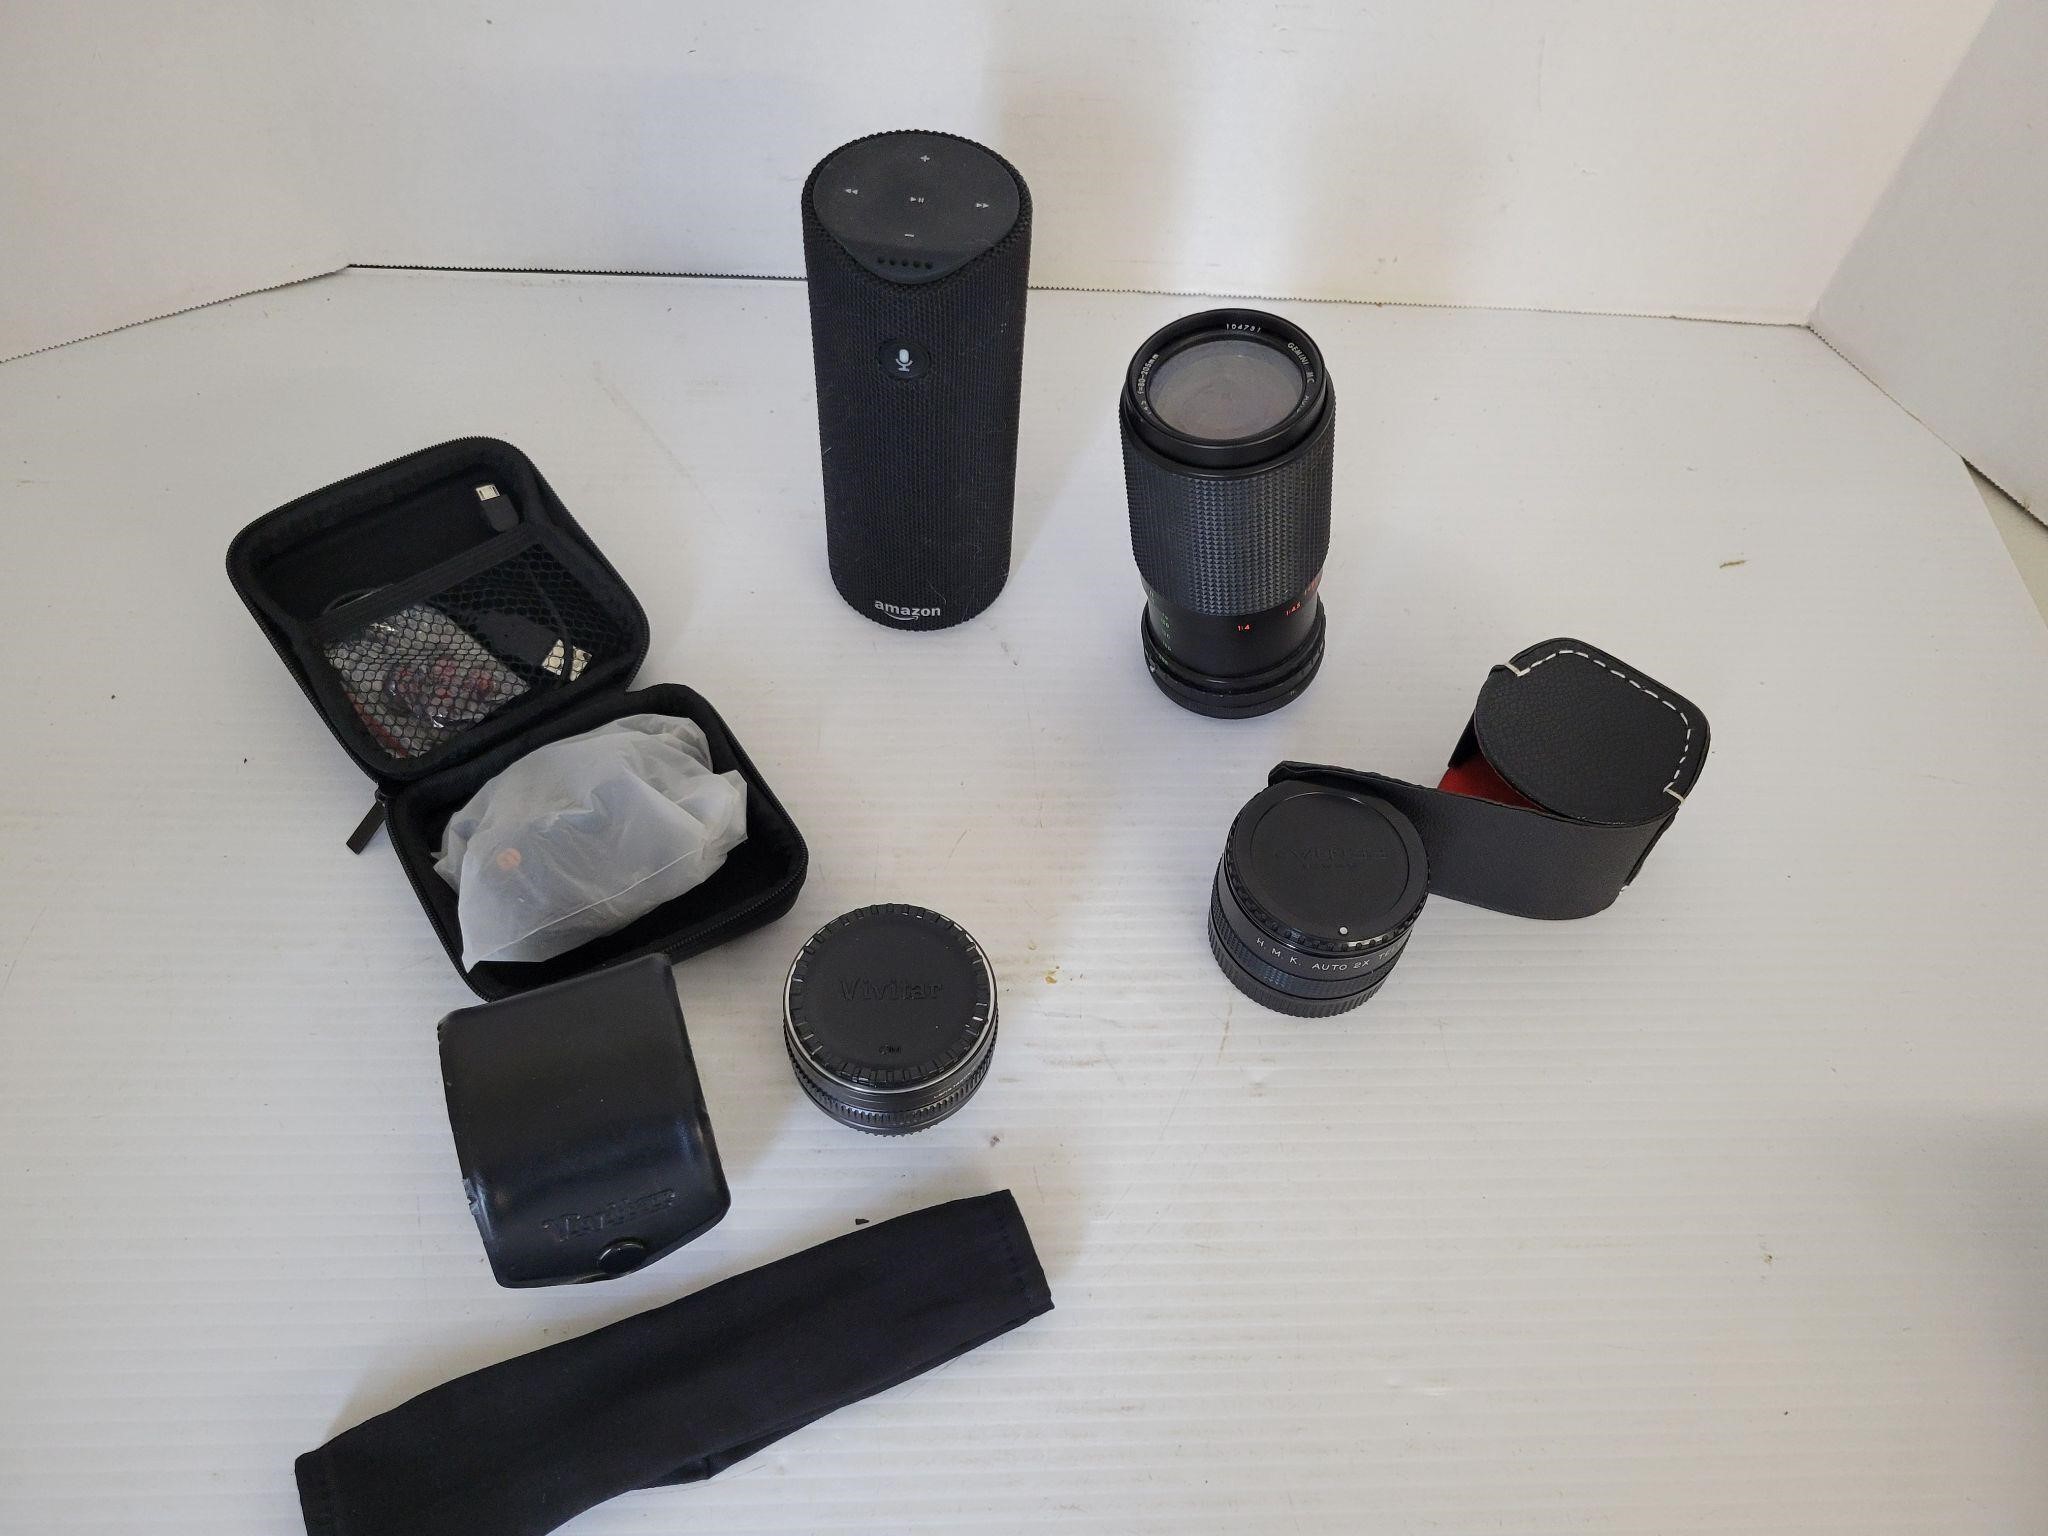 Camera lenses and more